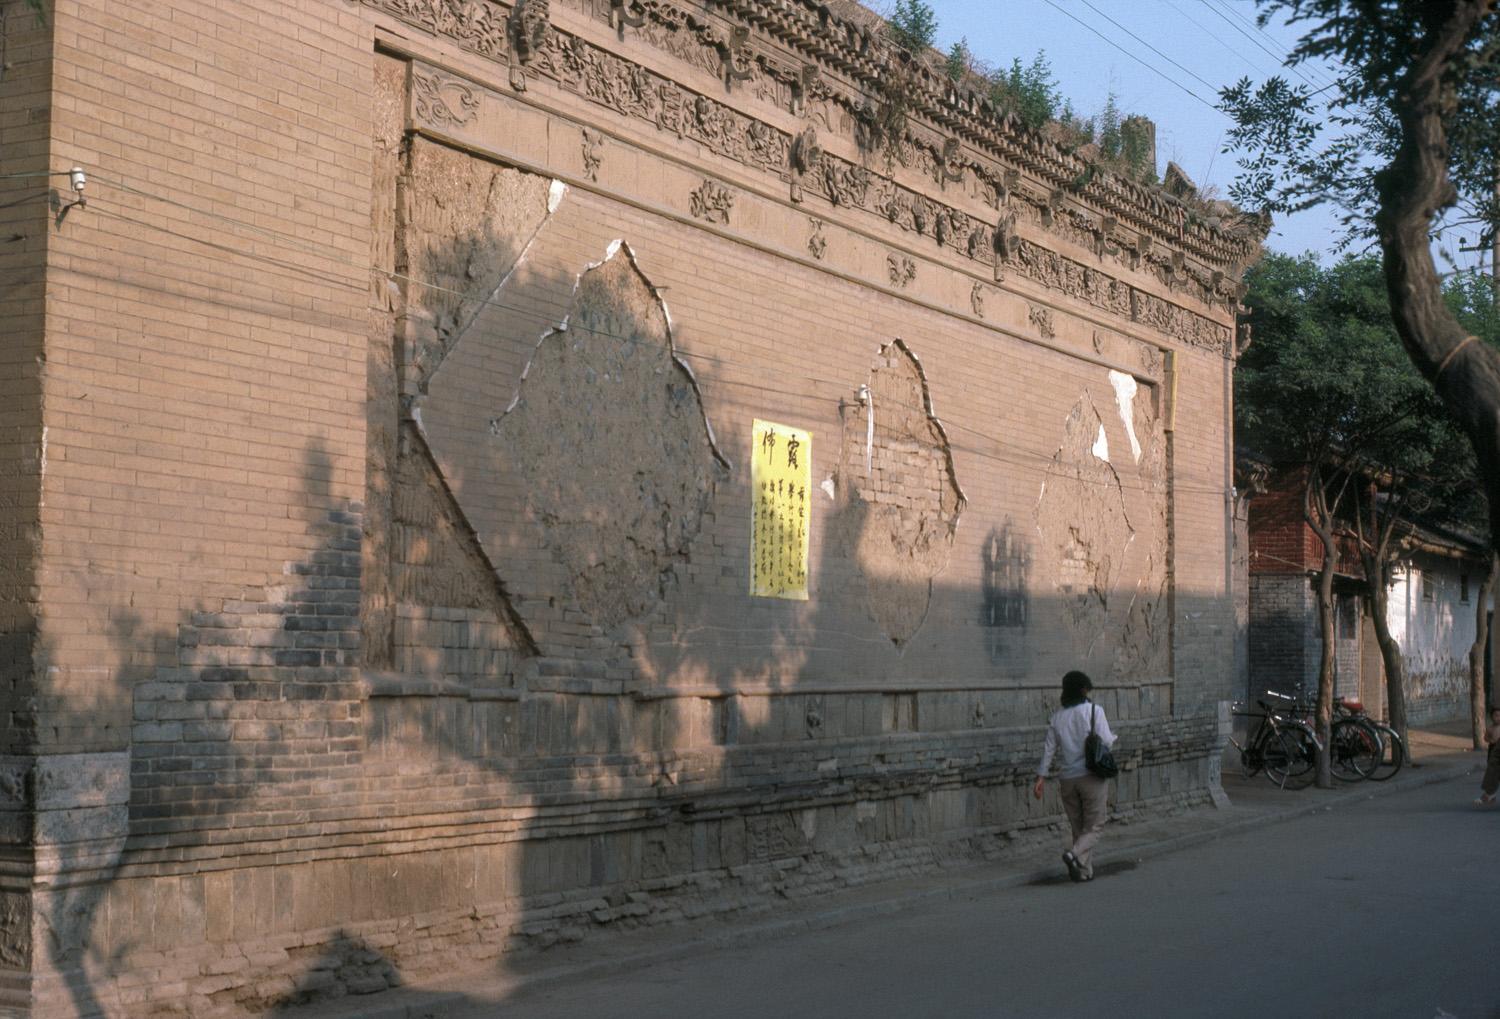 View showing damage to precinct wall with the removal of sculptural lozenges